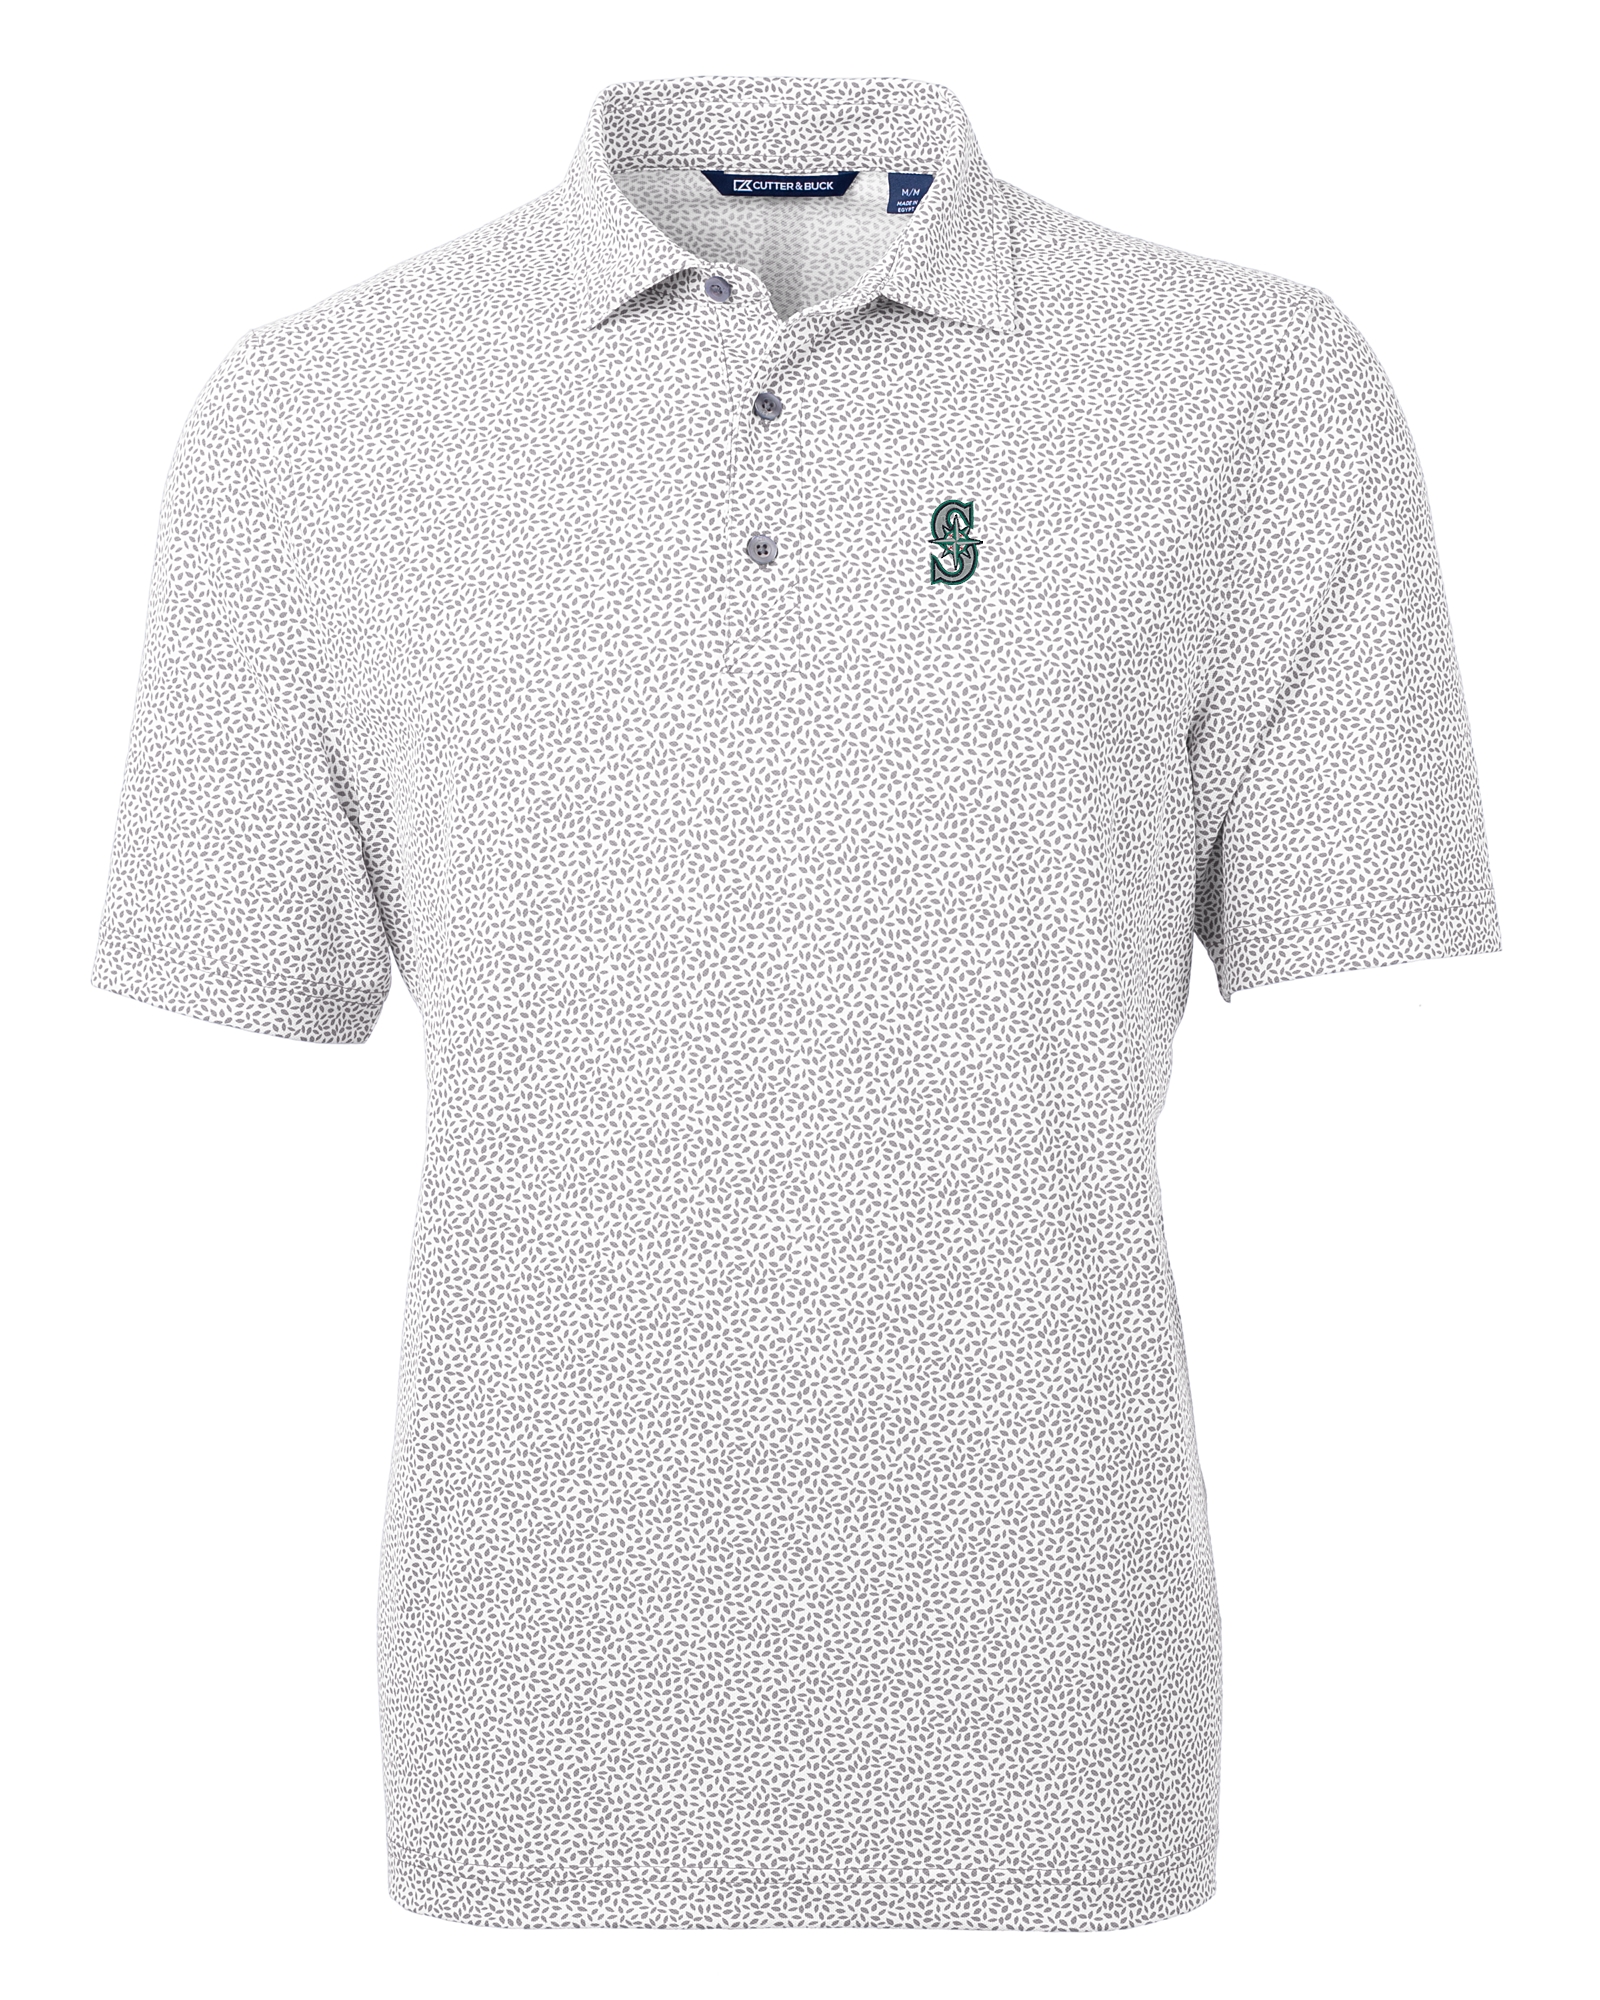 Seattle Mariners Cutter & Buck Women's DryTec Virtue Eco Pique Recycled  Polo - White